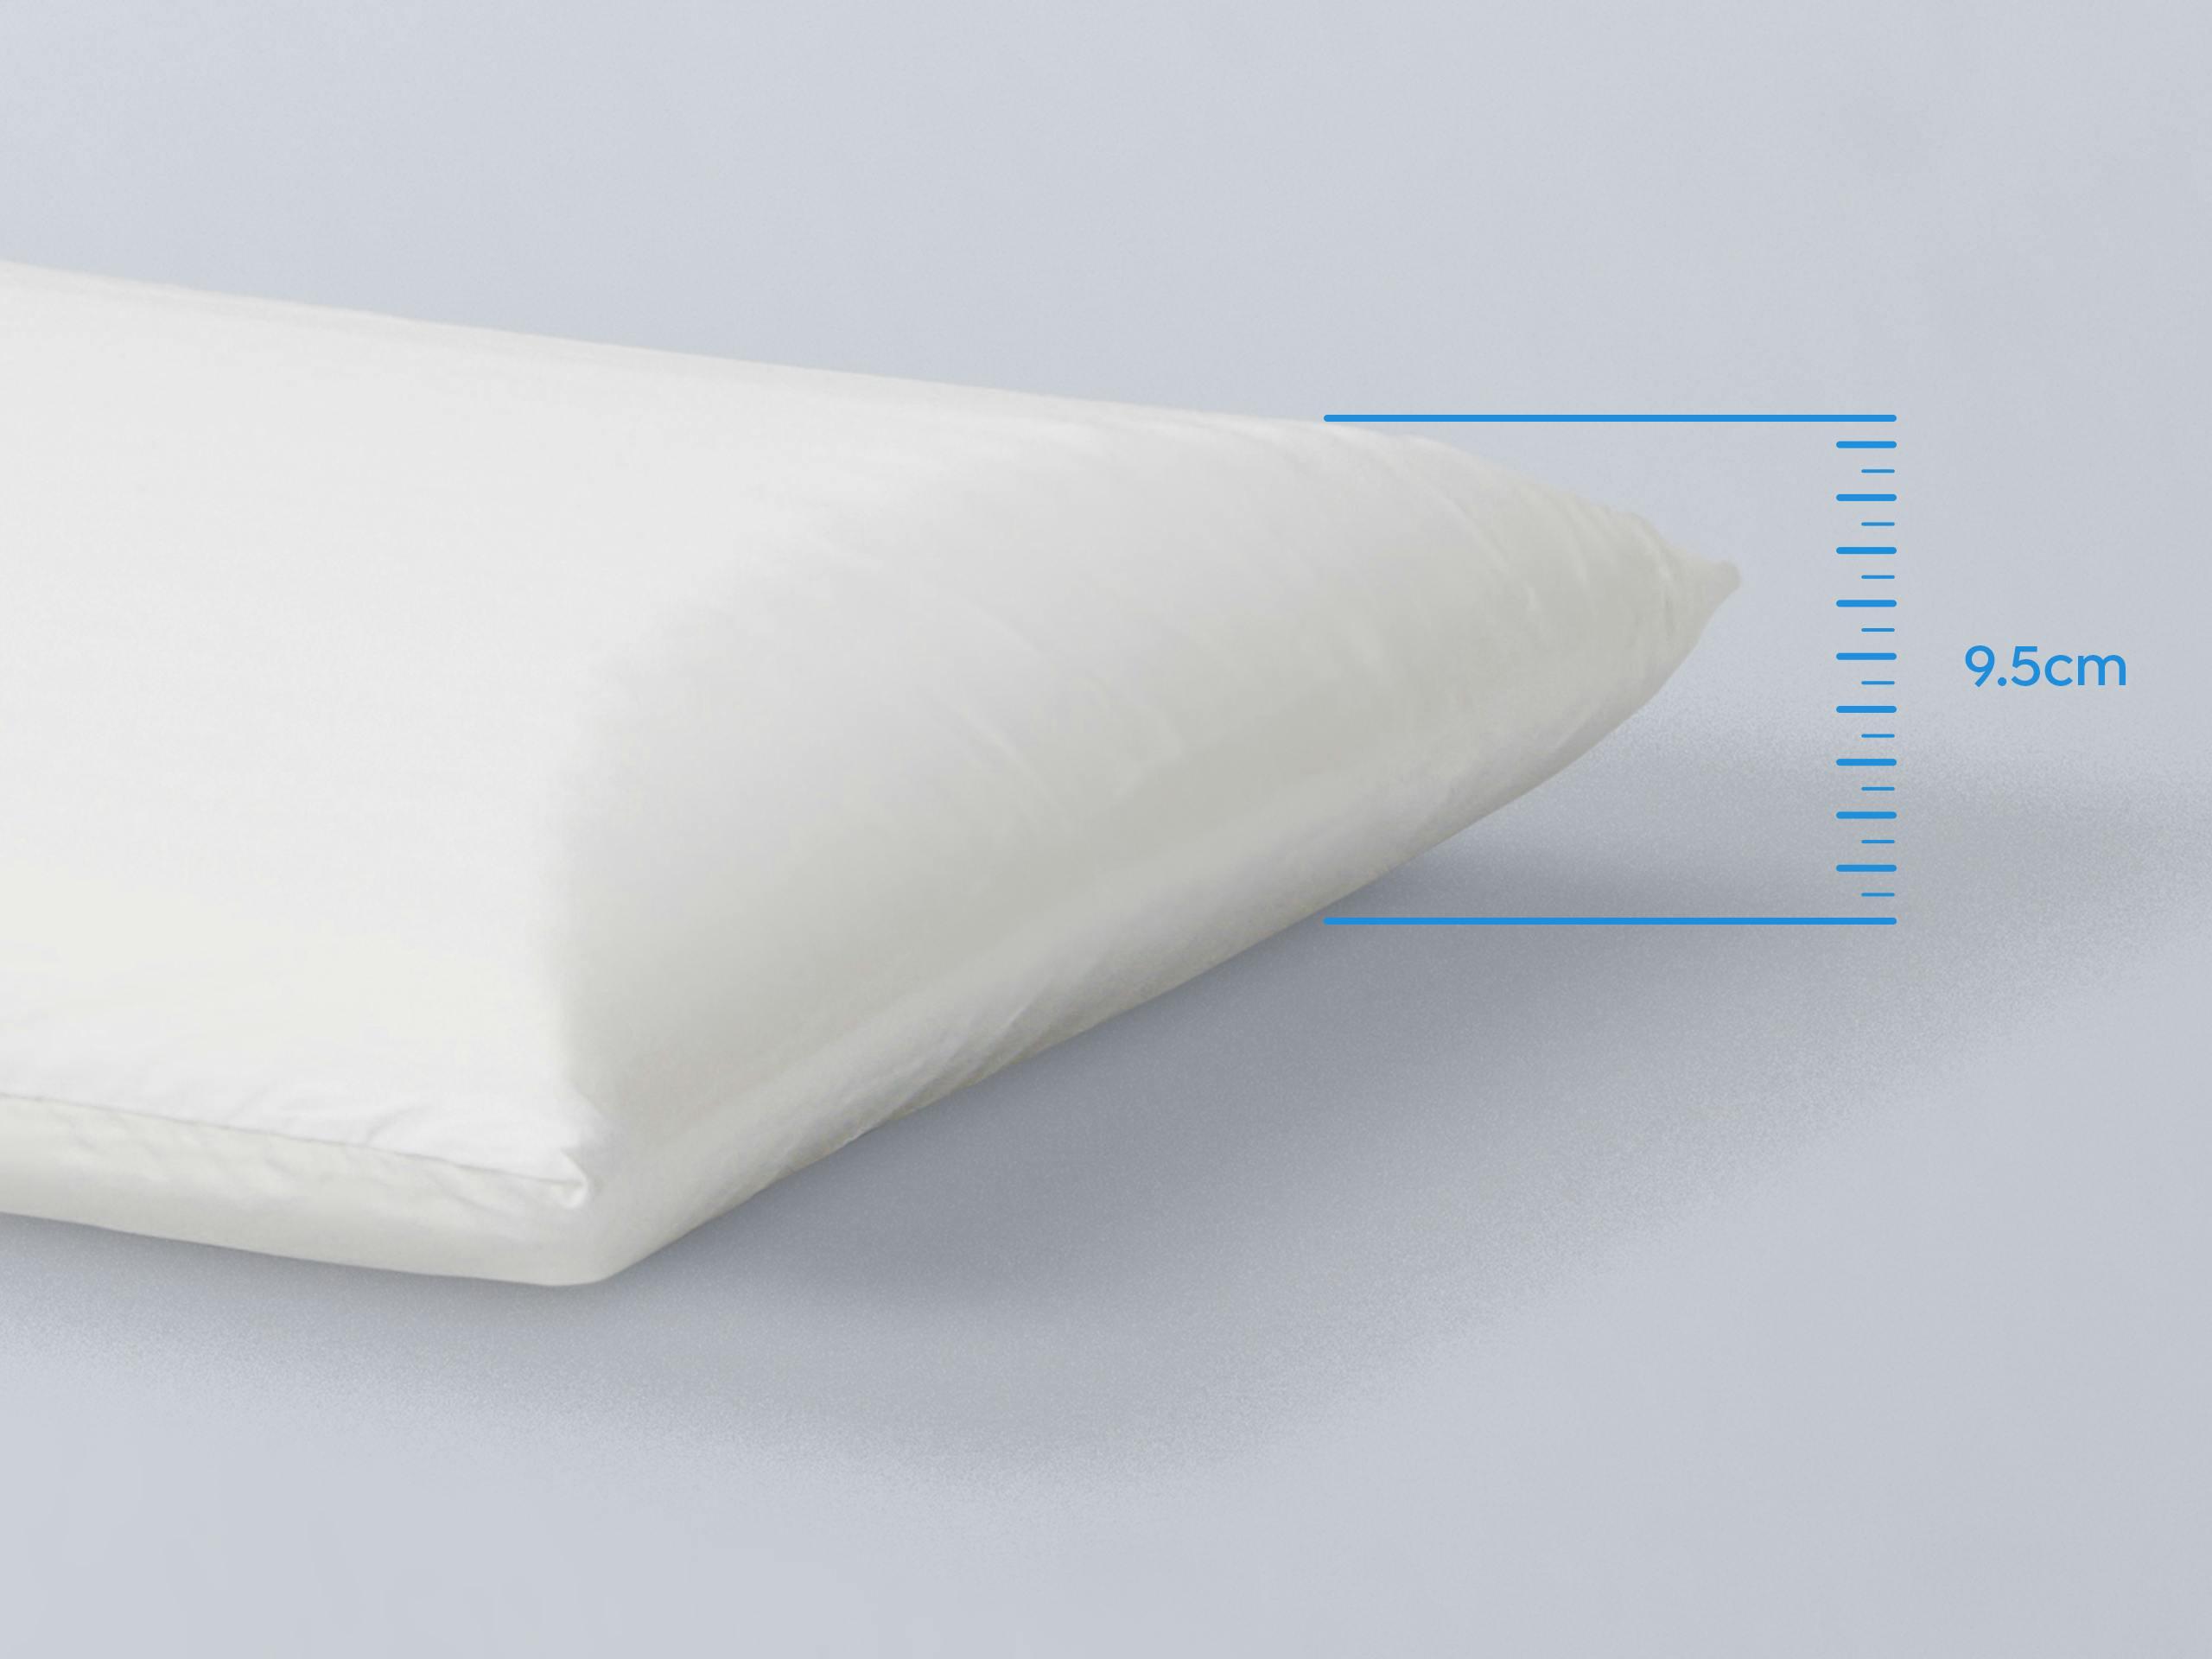 Pillow being measured as 9.5cm thick.